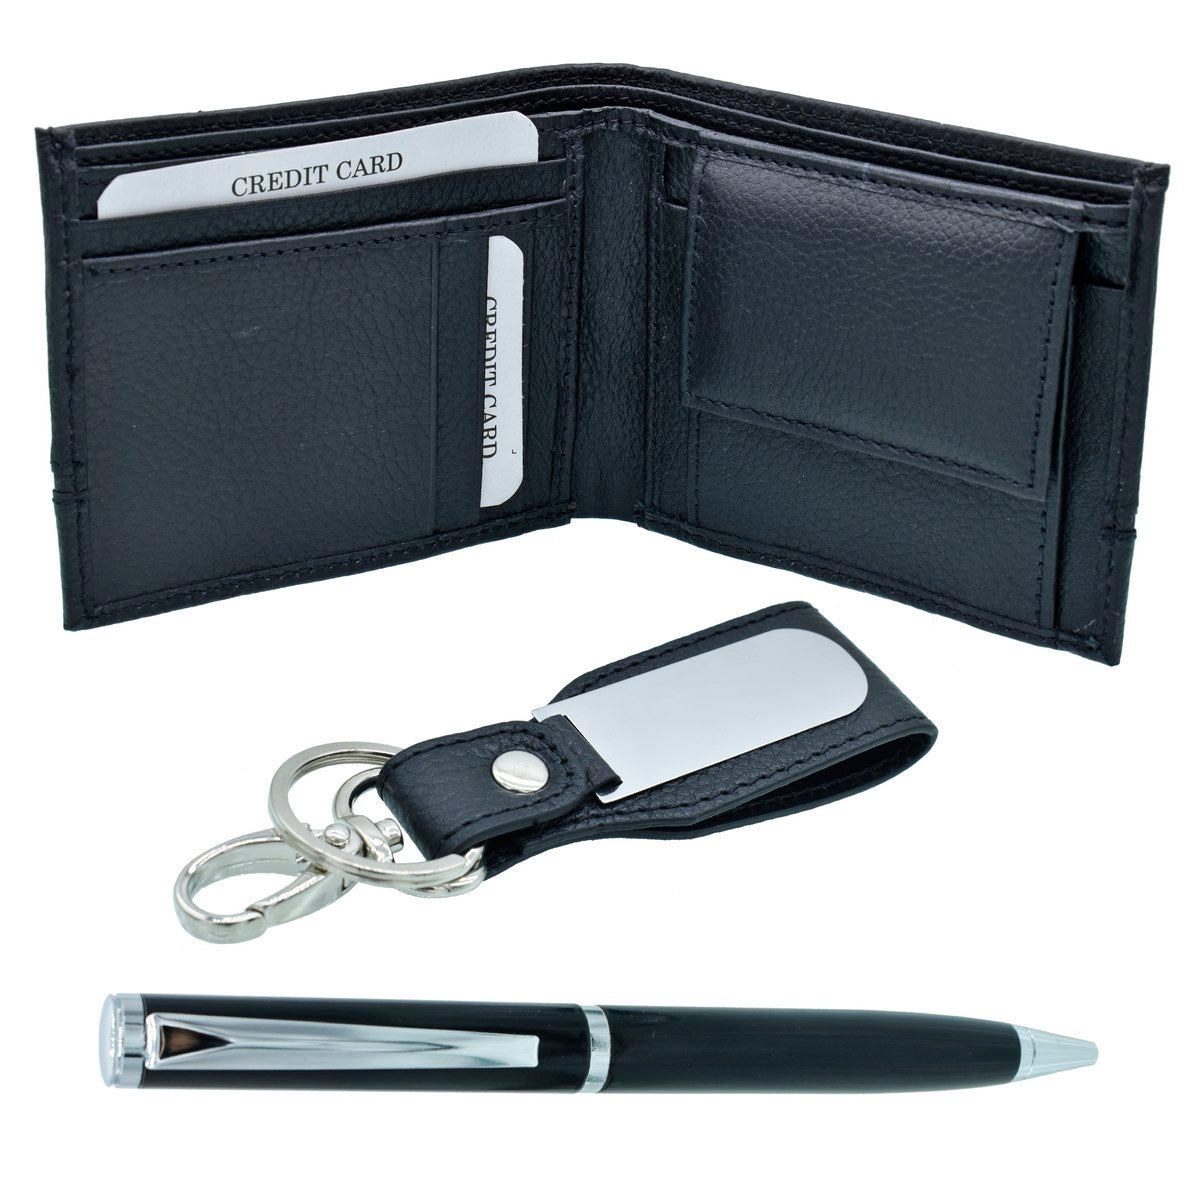 Black 3in1 Pen, Wallet, and Keychain Gift Set - For Employee Joining Kit, Corporate, Client or Dealer Gifting JASET9408BK